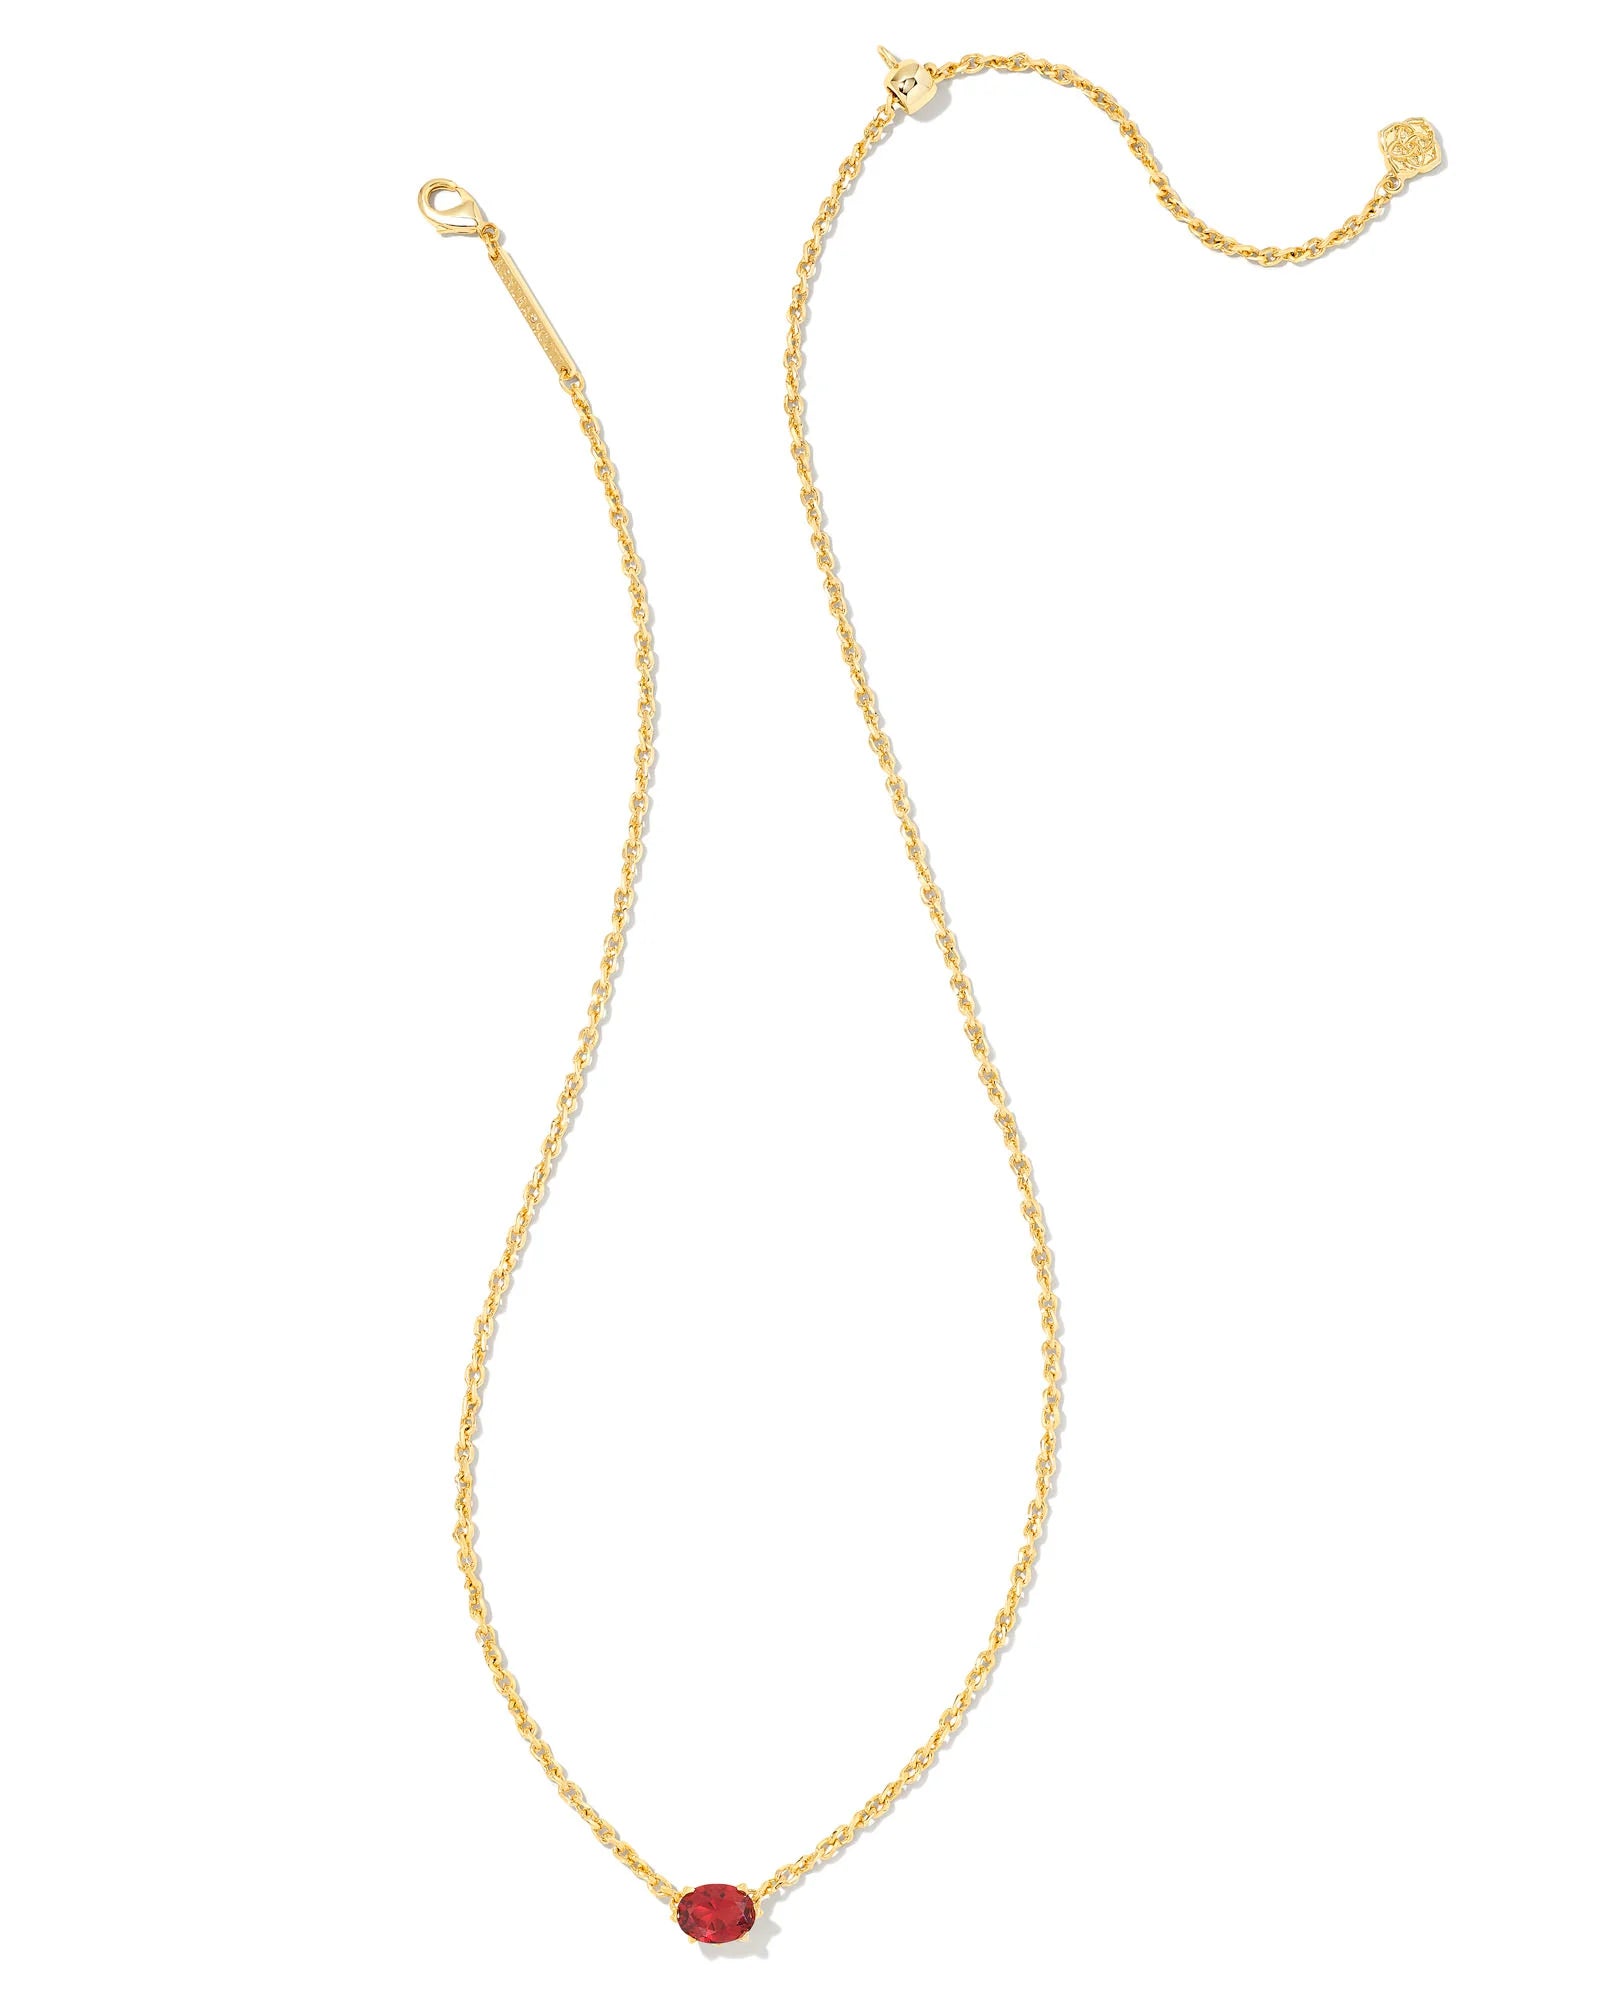 Kendra Scott Cailin Crystal Pendant Necklace Gold Burgundy Crystal-Necklaces-Kendra Scott-N1941GLD-The Twisted Chandelier